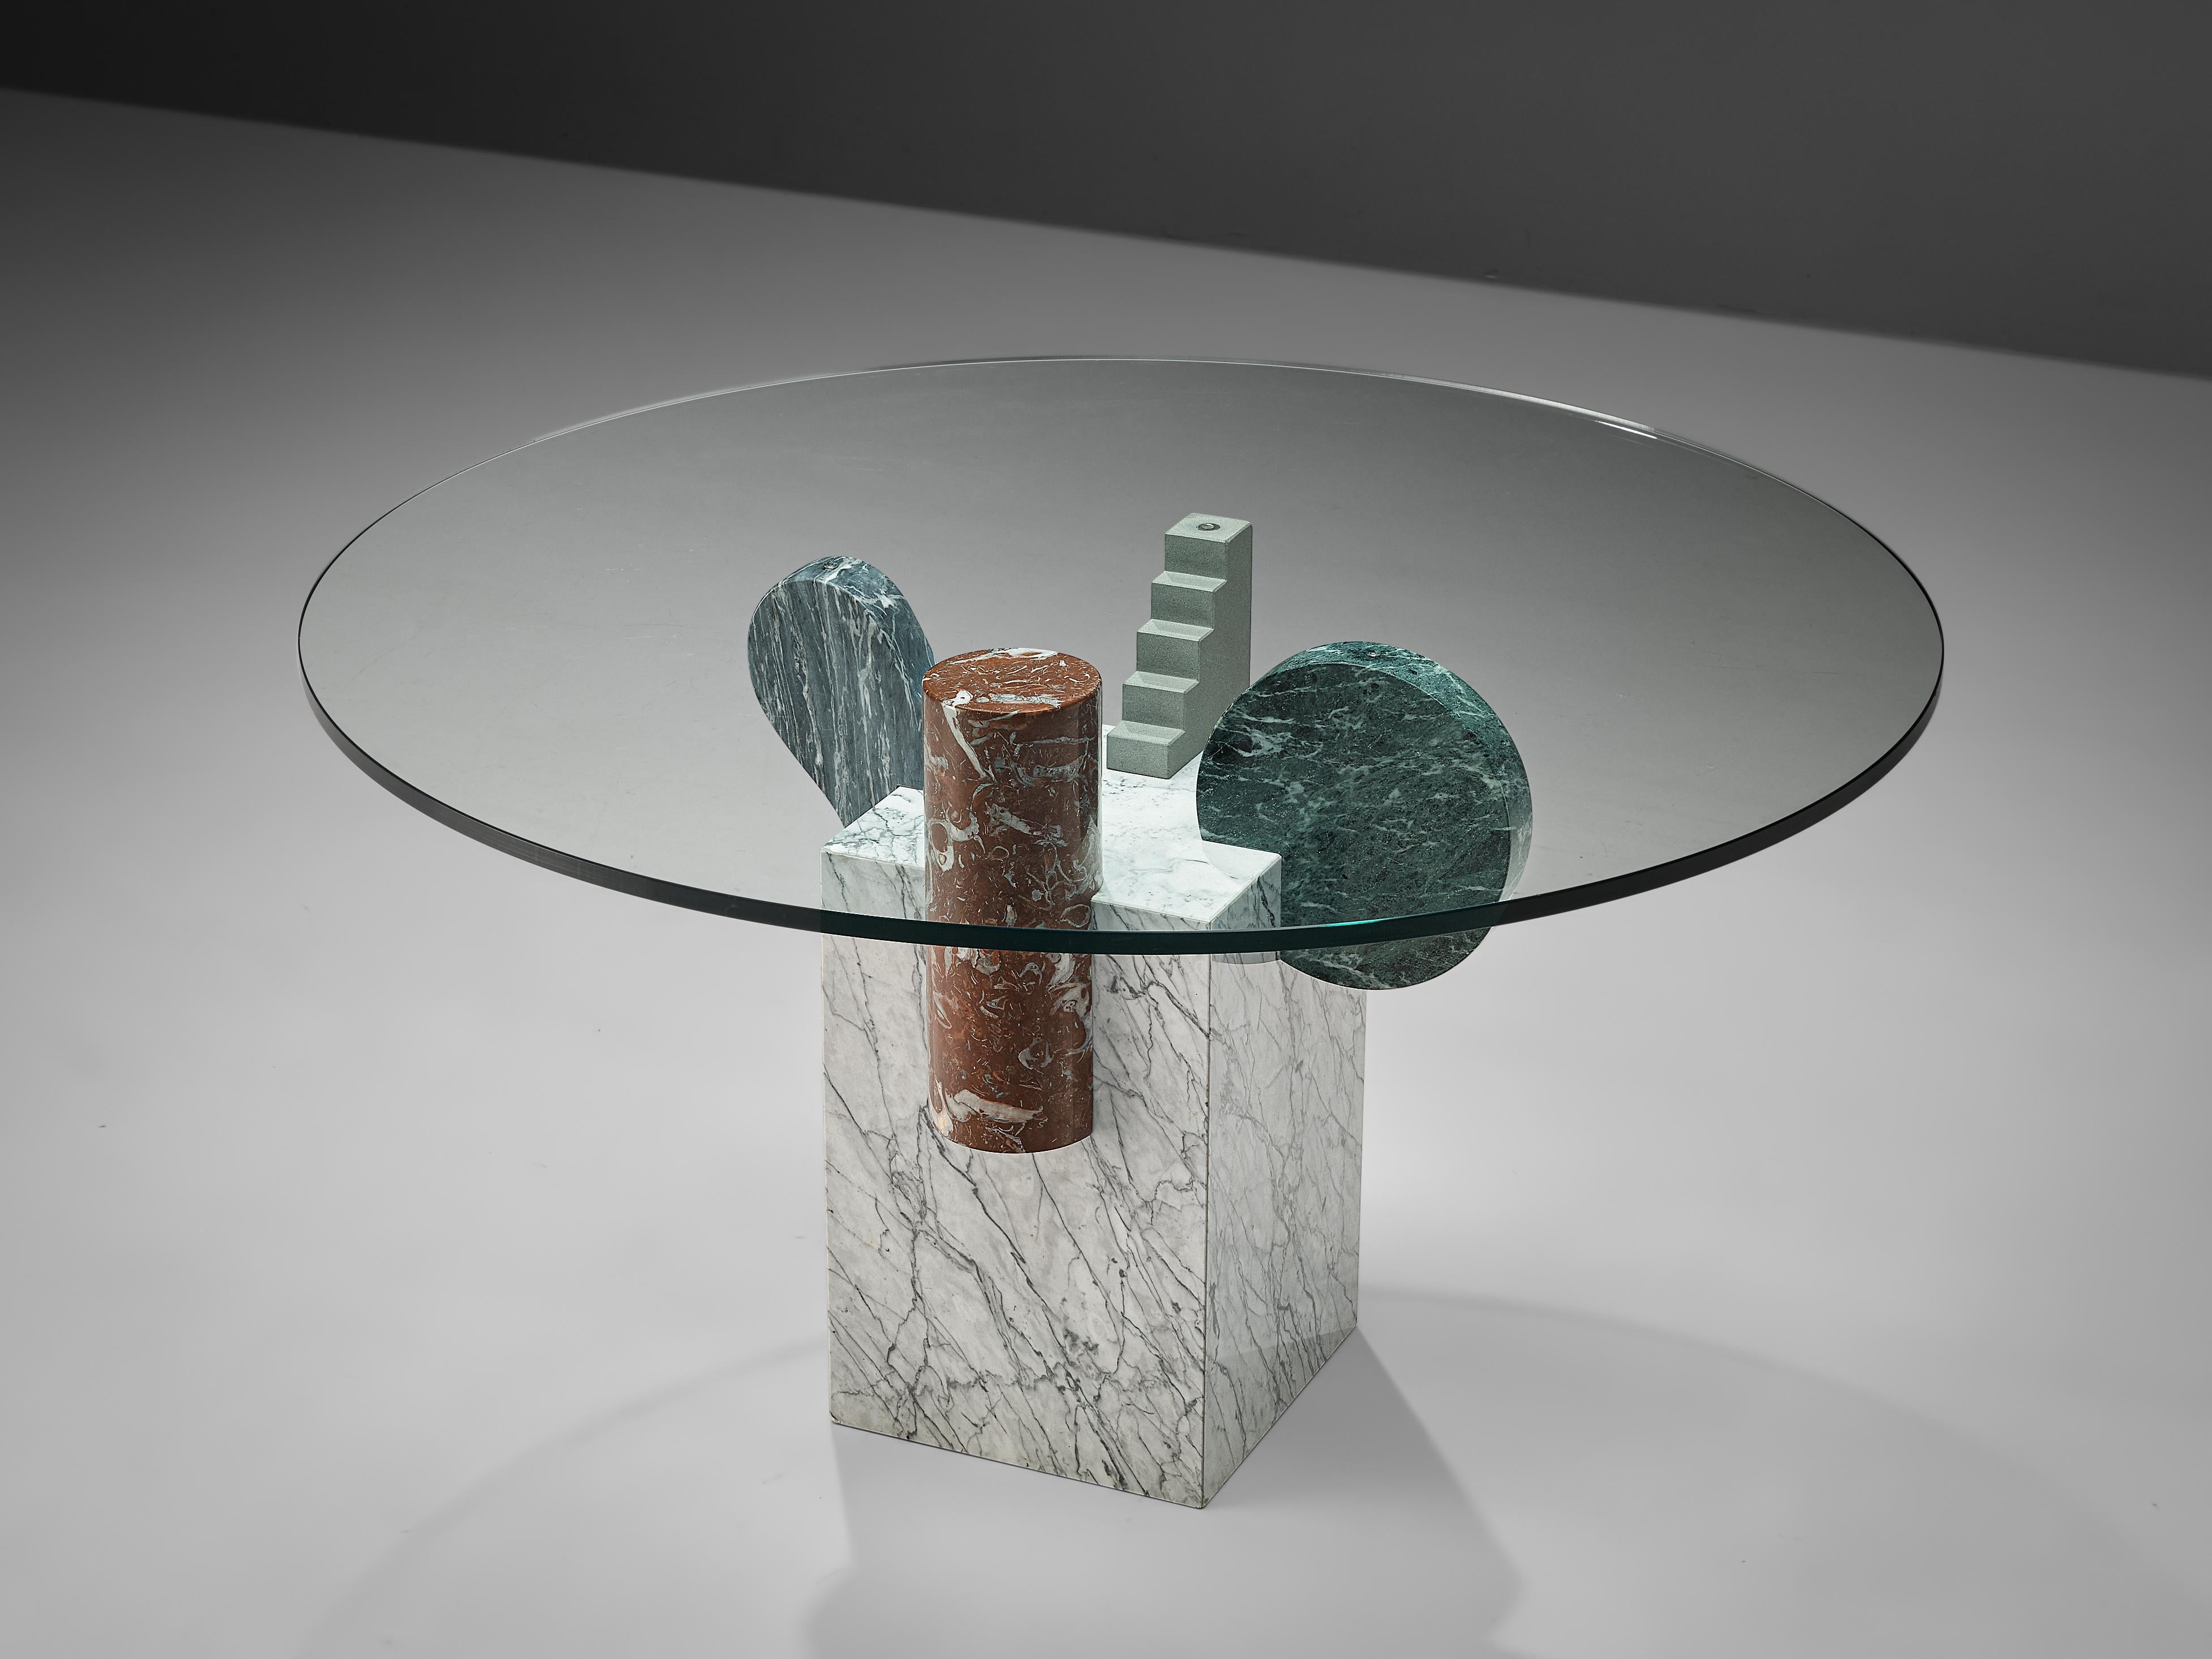 Pier Alessandro Giusti and Egidio Di Rosa for Up&Up, dining table, marble, granite, glass, Italy, 1970s

Postmodern Italian dining table with round glass top and marble foot designed by the duo Pier Alessandro Giusti and Egidio Di Rosa for Up&Up.